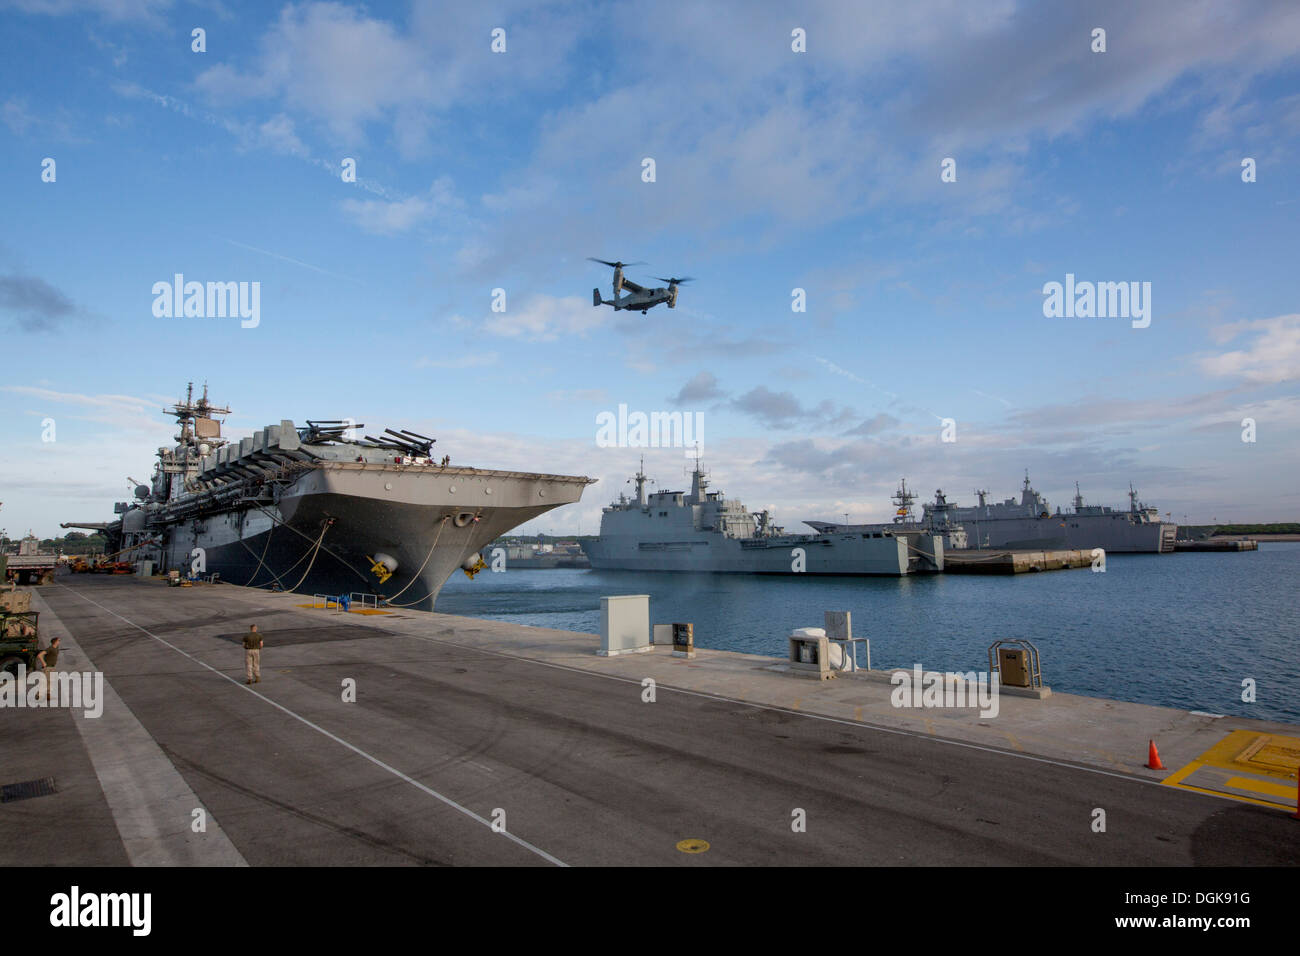 An MV-22 Osprey takes off from the flight deck of the amphibious assault ship USS Kearsarge (LHD 3) while moored. Kearsarge is deployed as part of the Kearsarge Amphibious Ready Group supporting maritime security operations and theater security cooperatio Stock Photo